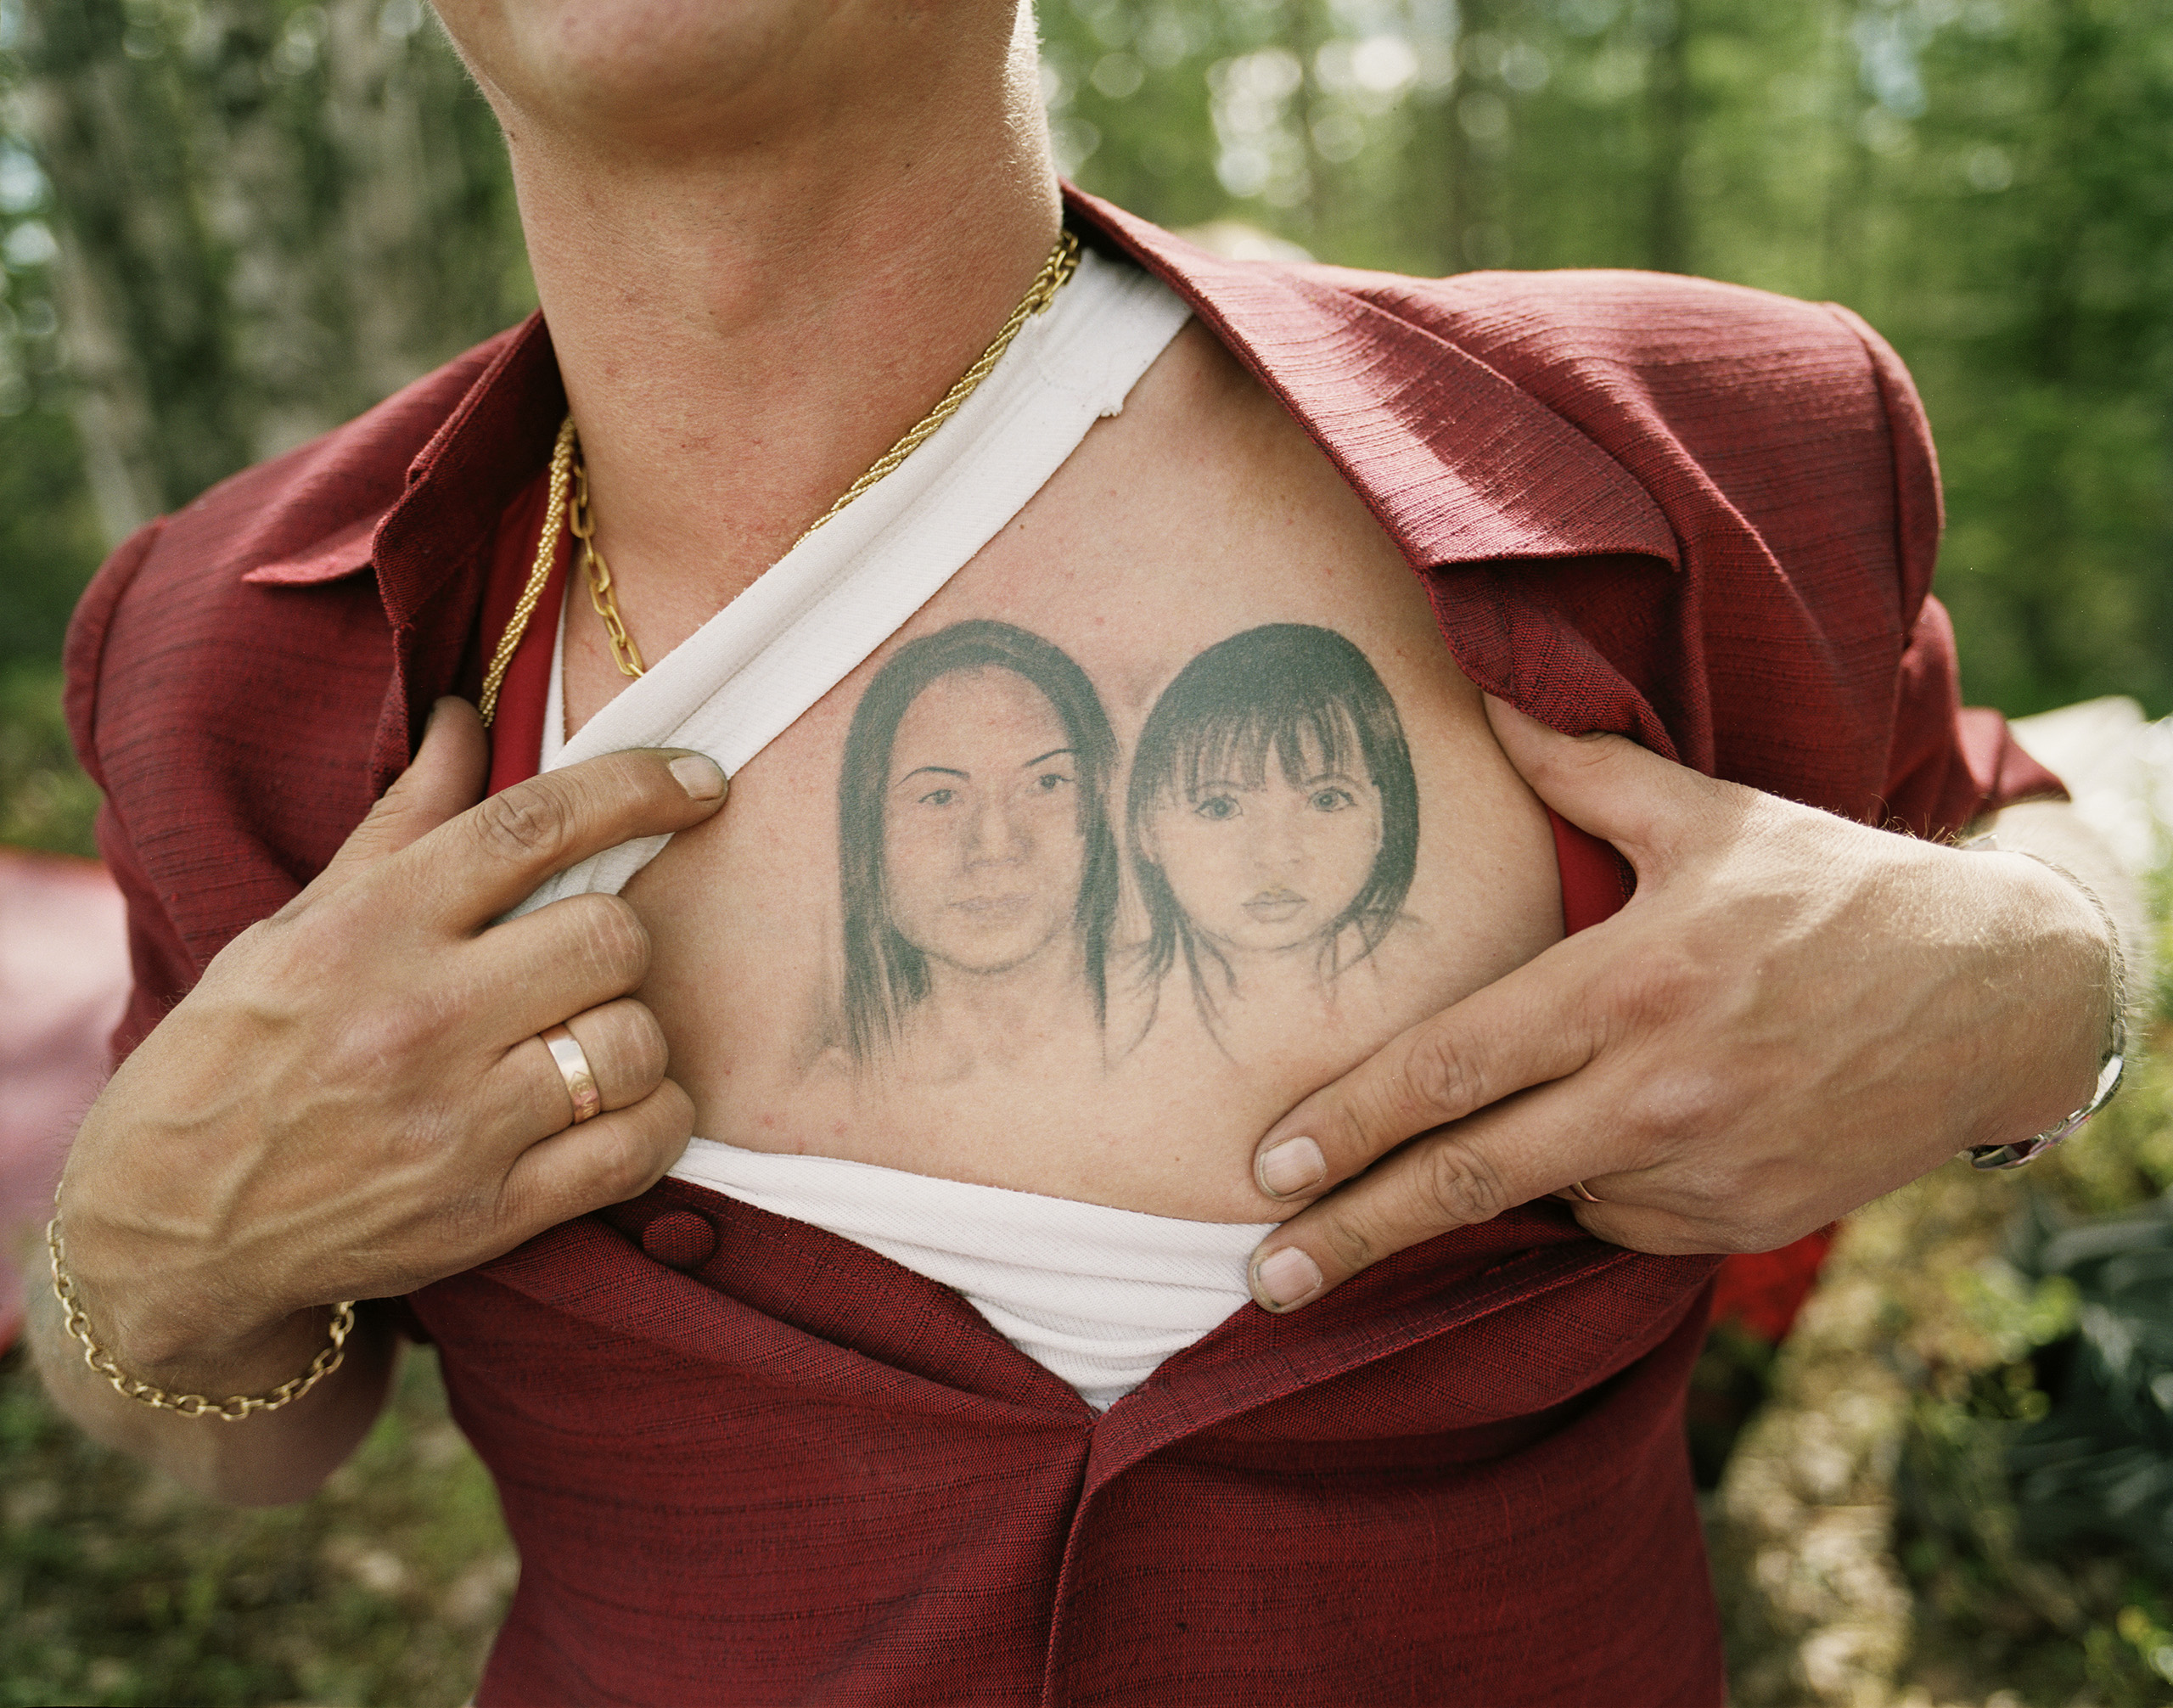 Stefan's tattoo of his wife and daughter, Fredrika, 2008.